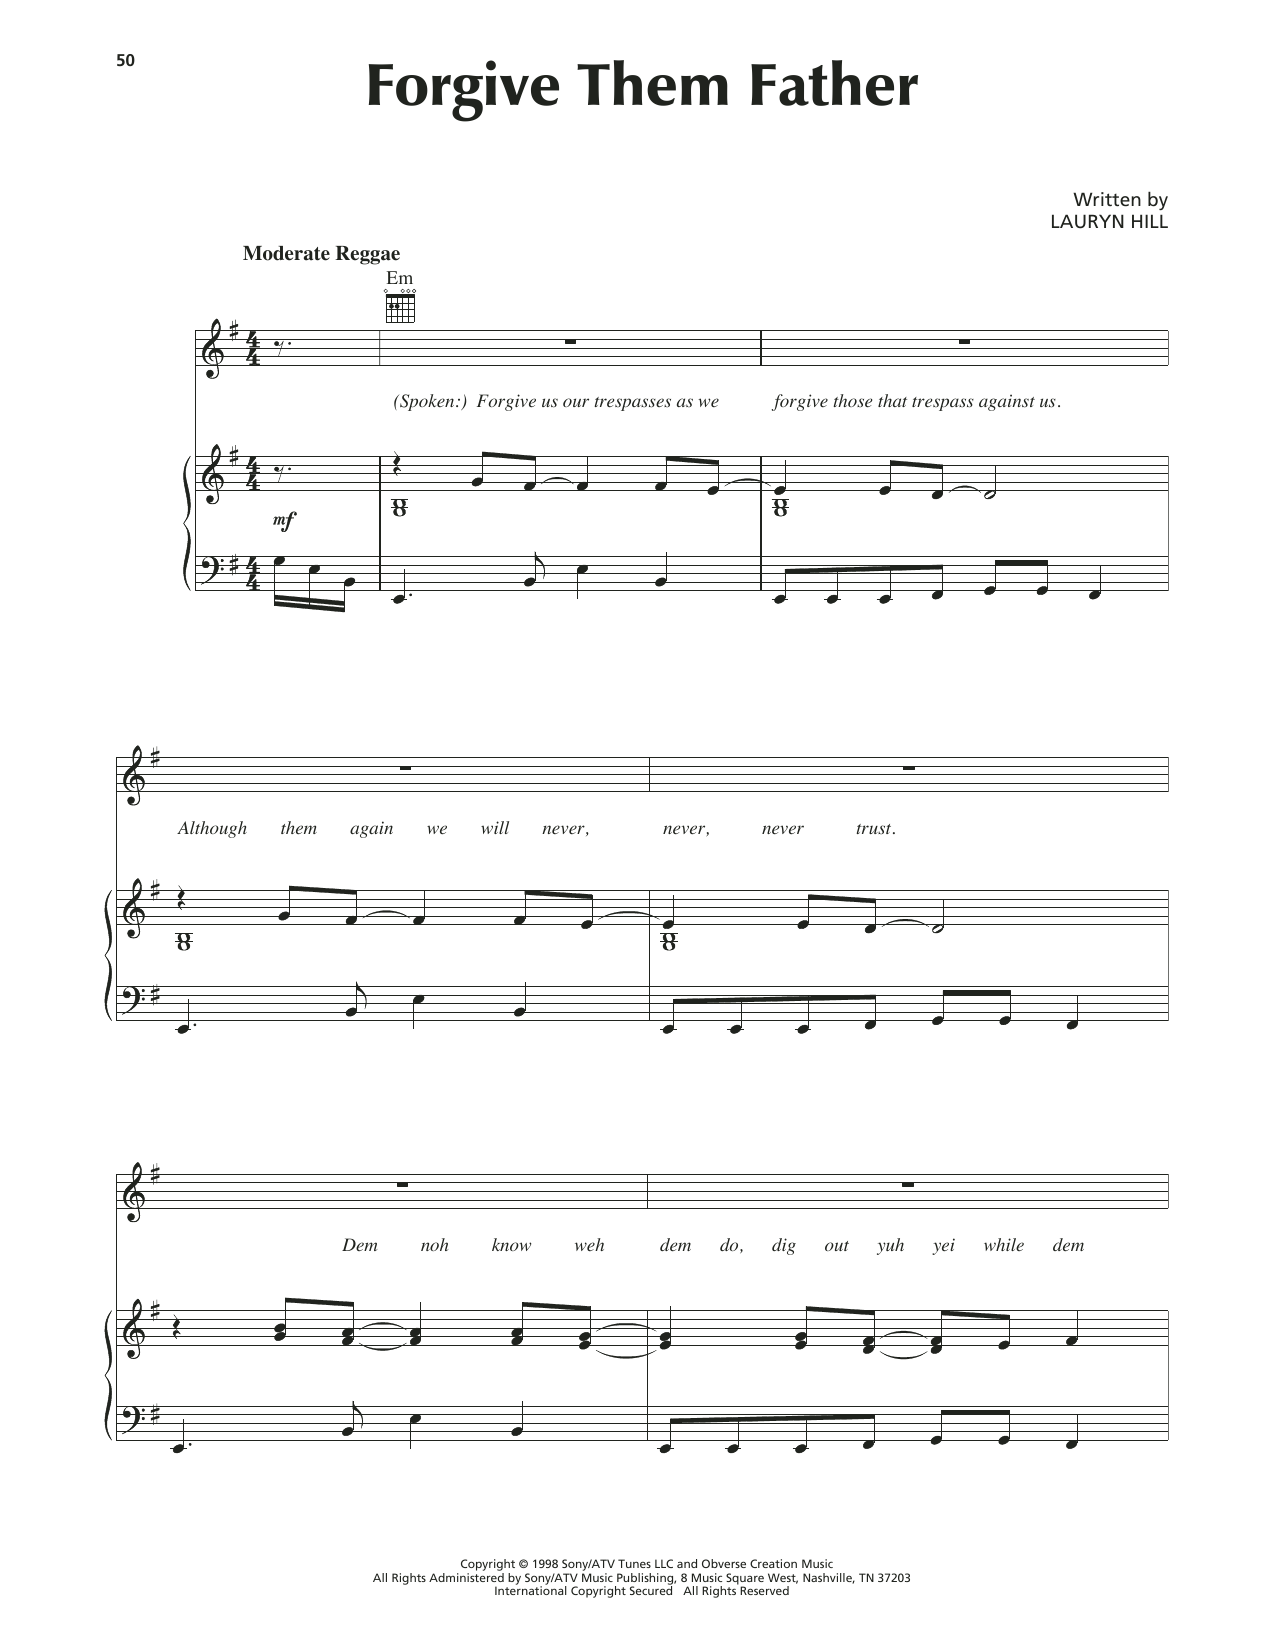 Download Lauryn Hill Forgive Them Father Sheet Music